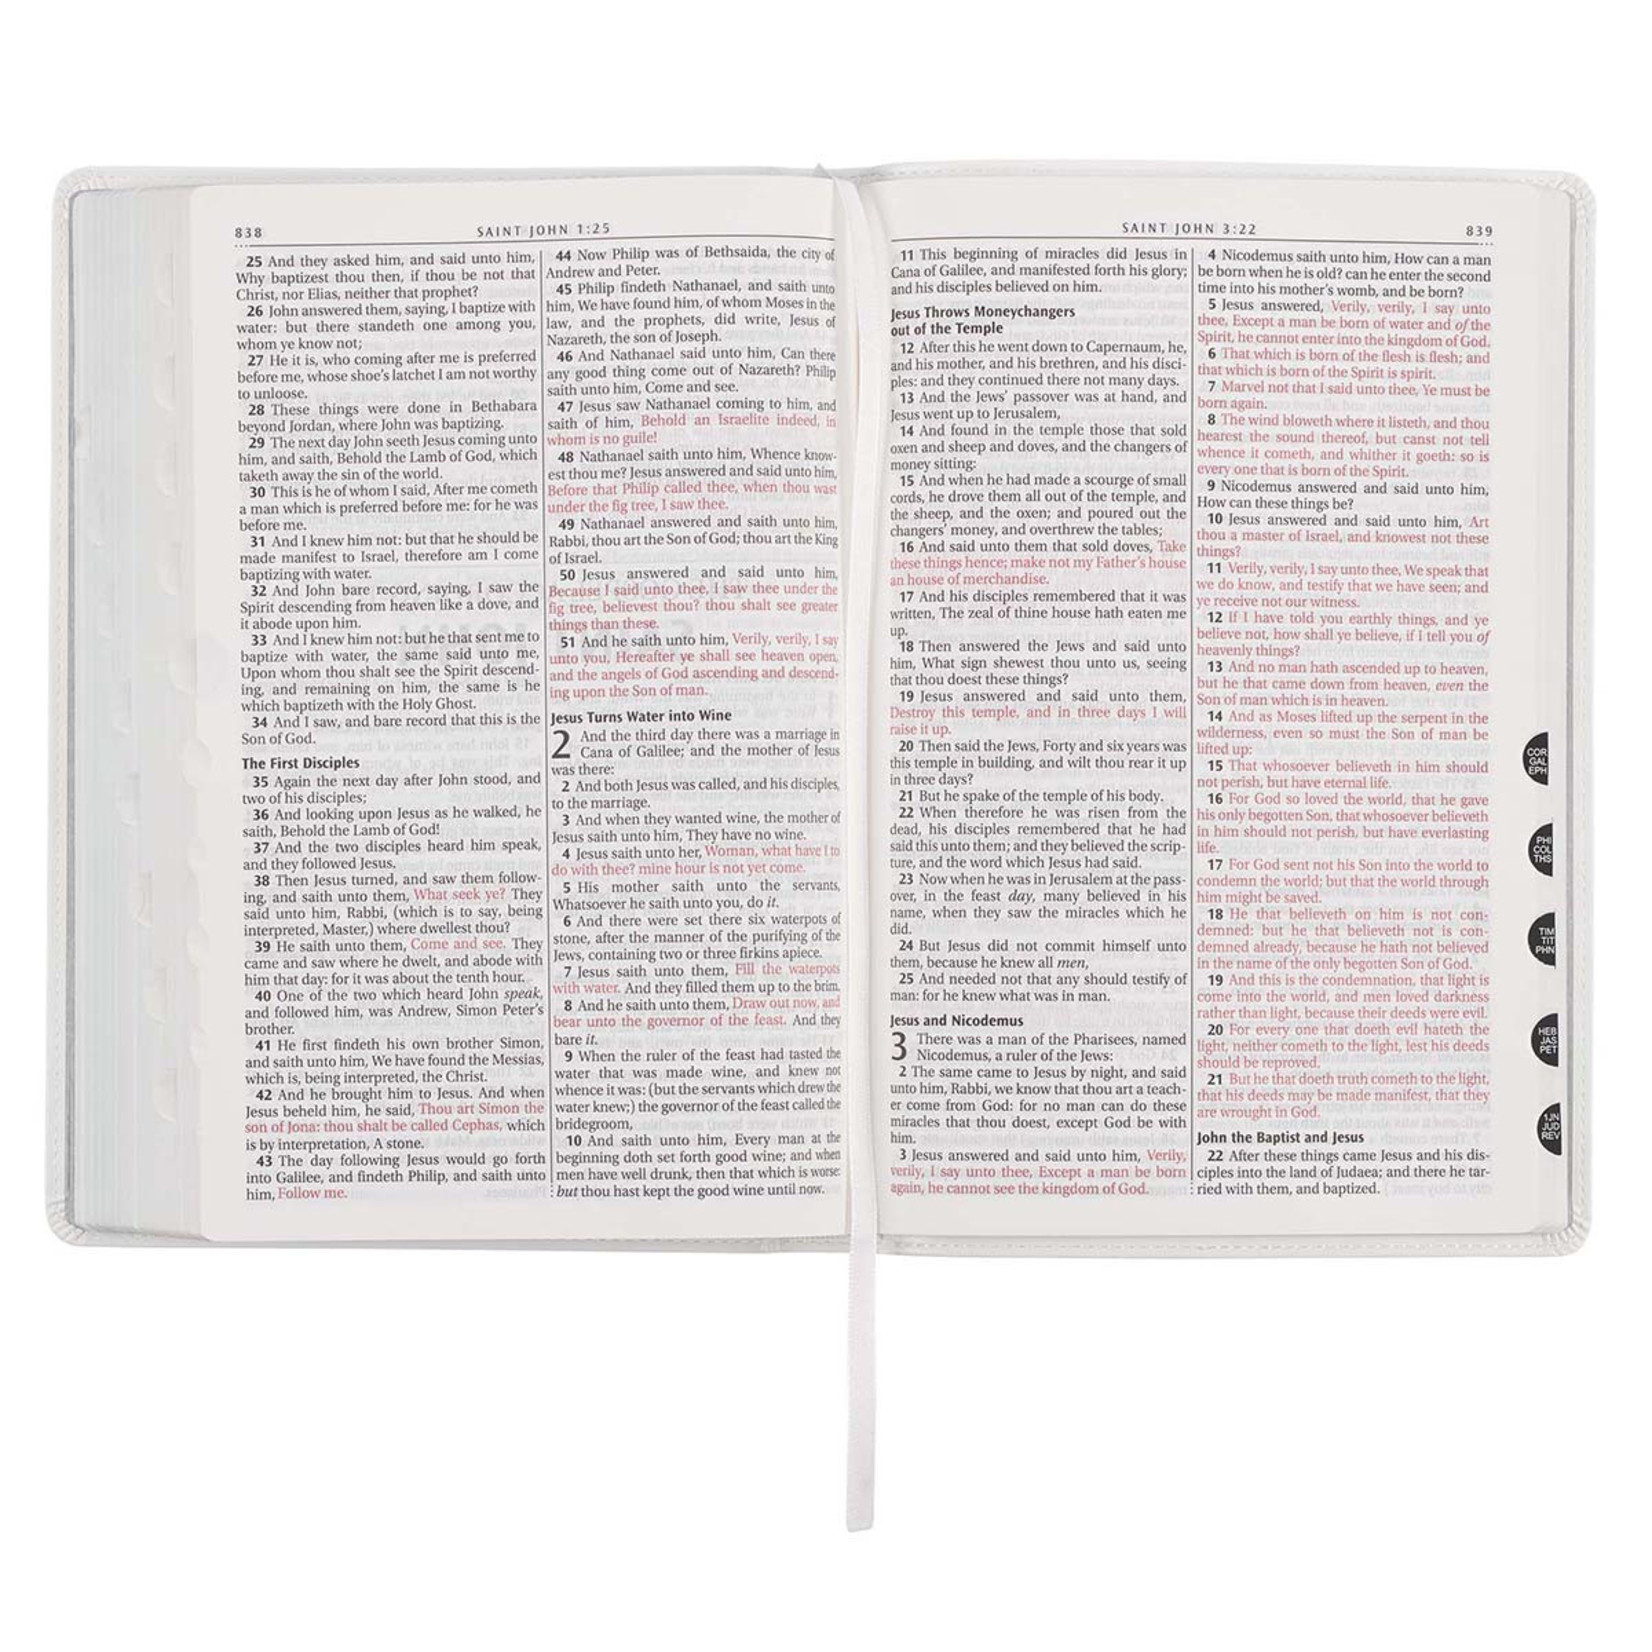 Christian Art Gifts White Faux Leather Large Print Thinline KJV Bible with Thumb Index